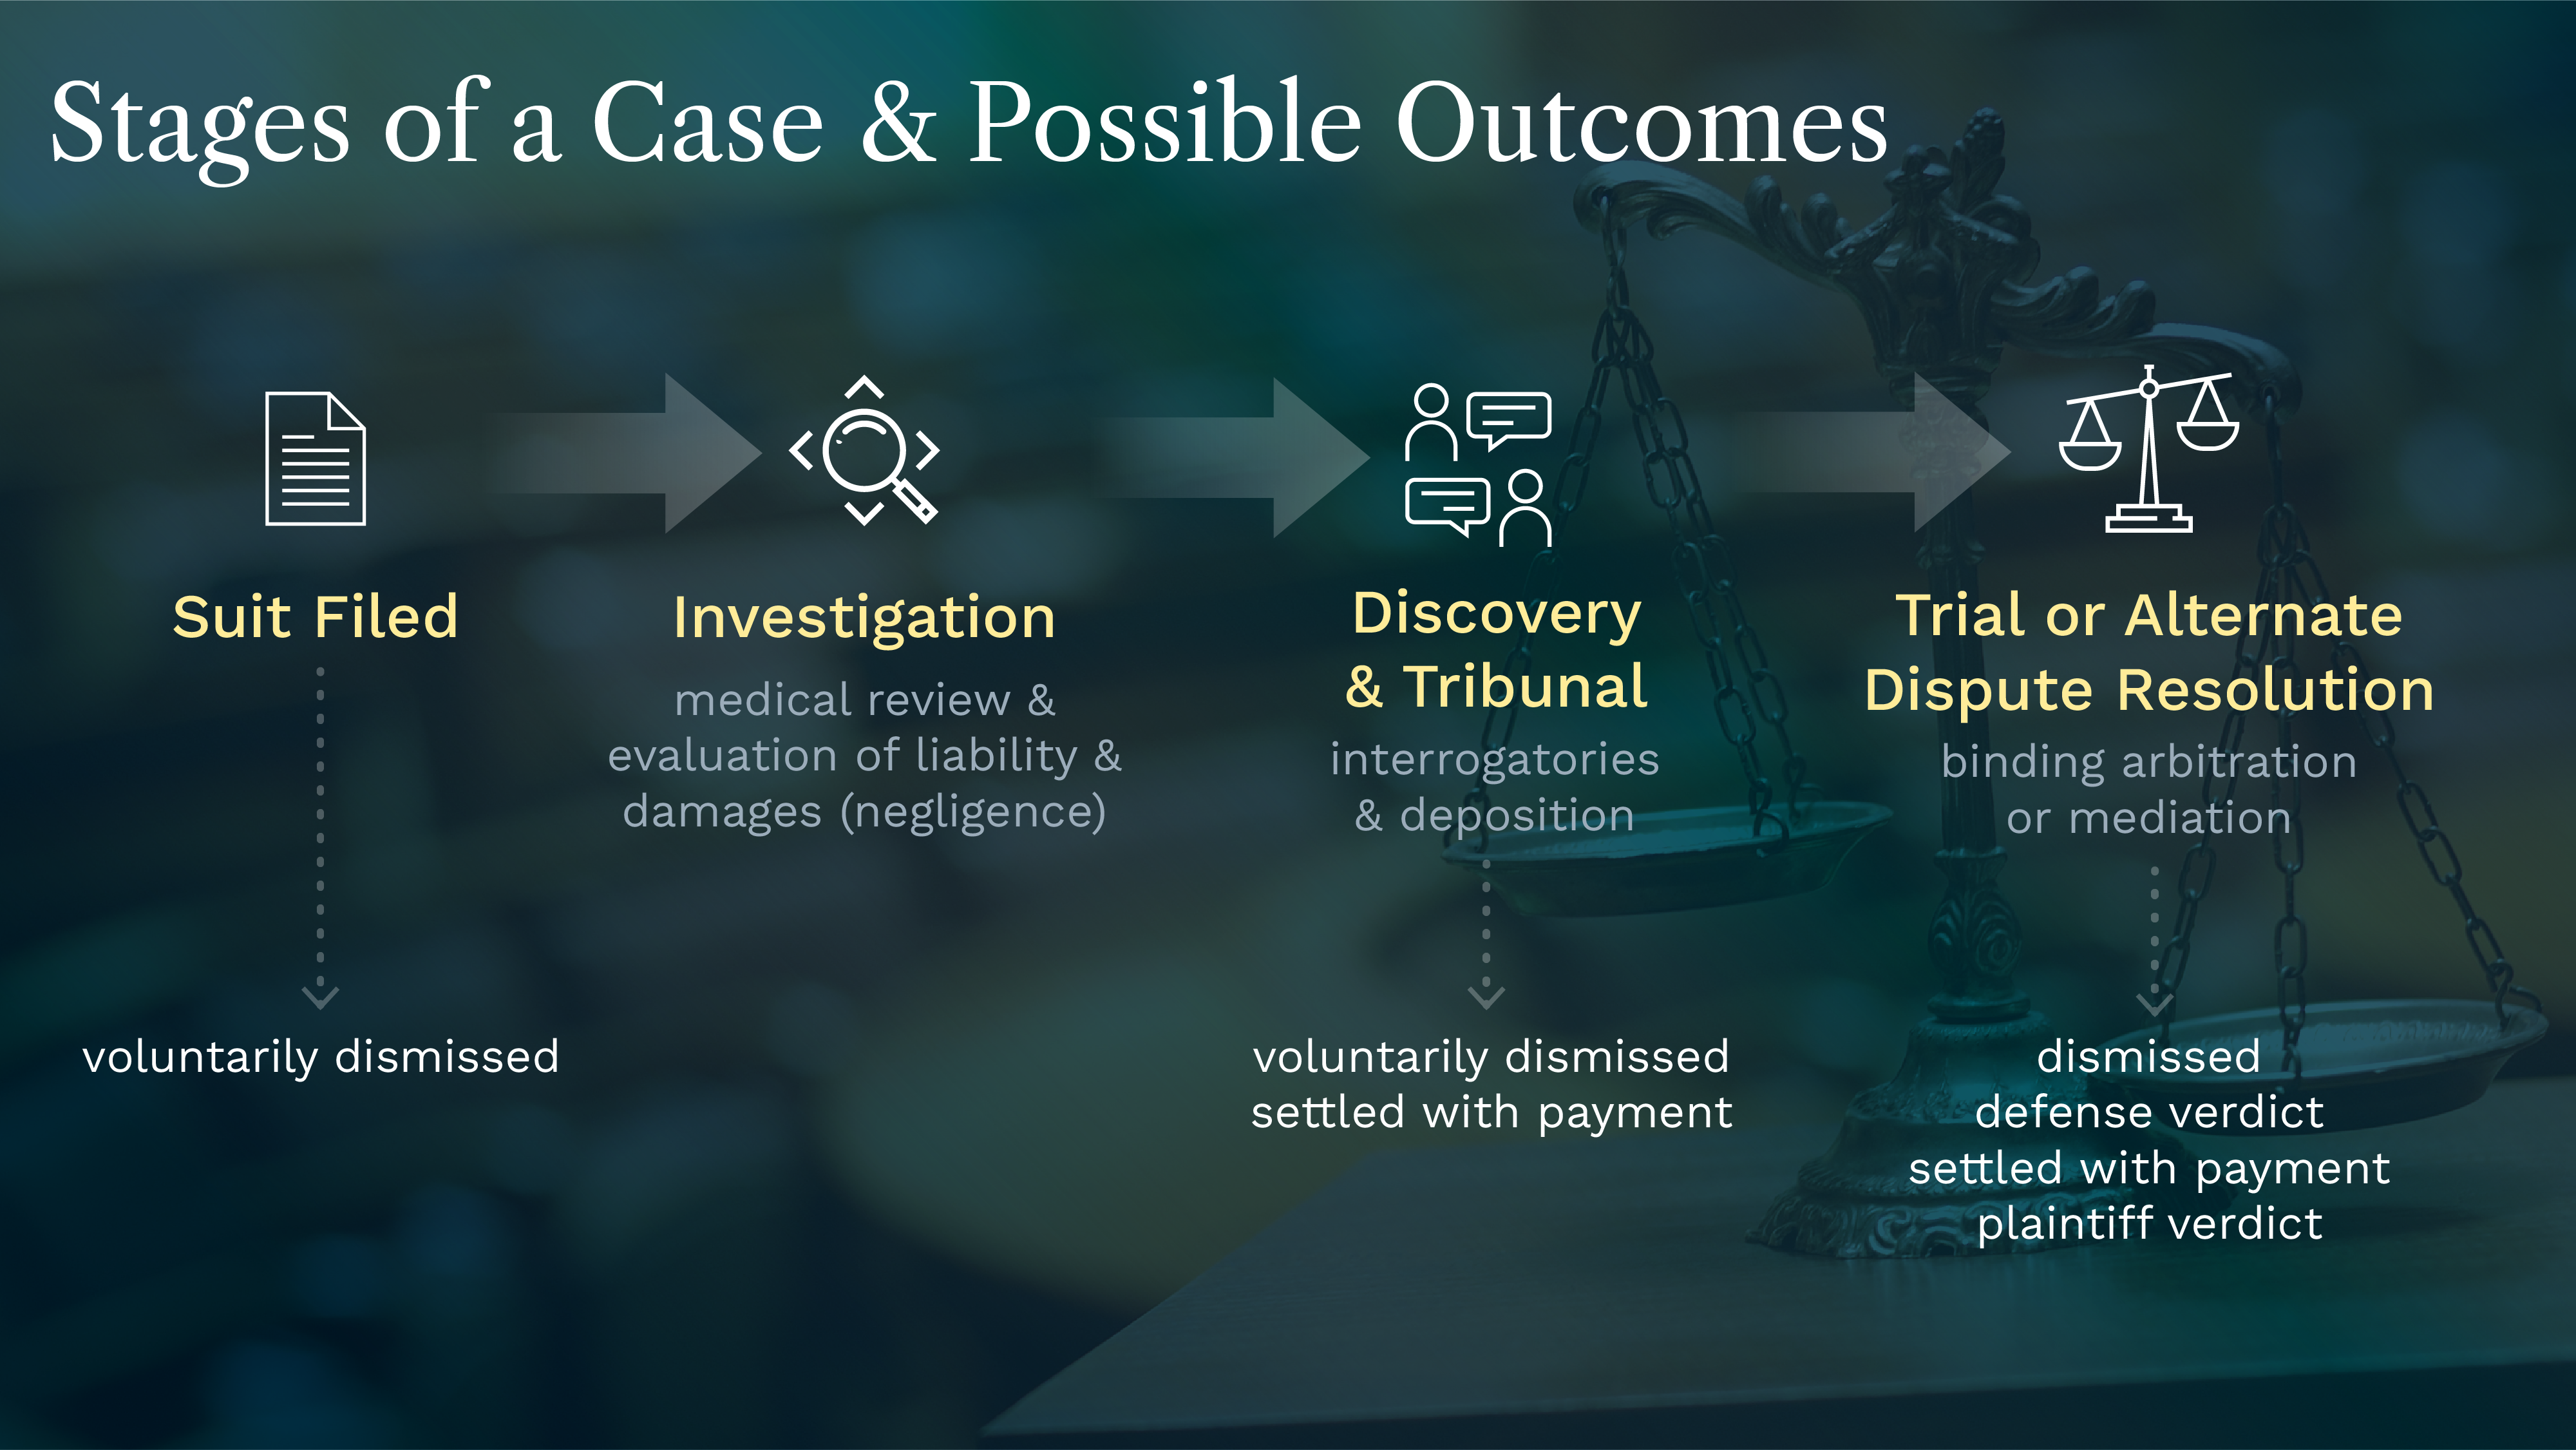 Stages of a Case and Possible Outcomes